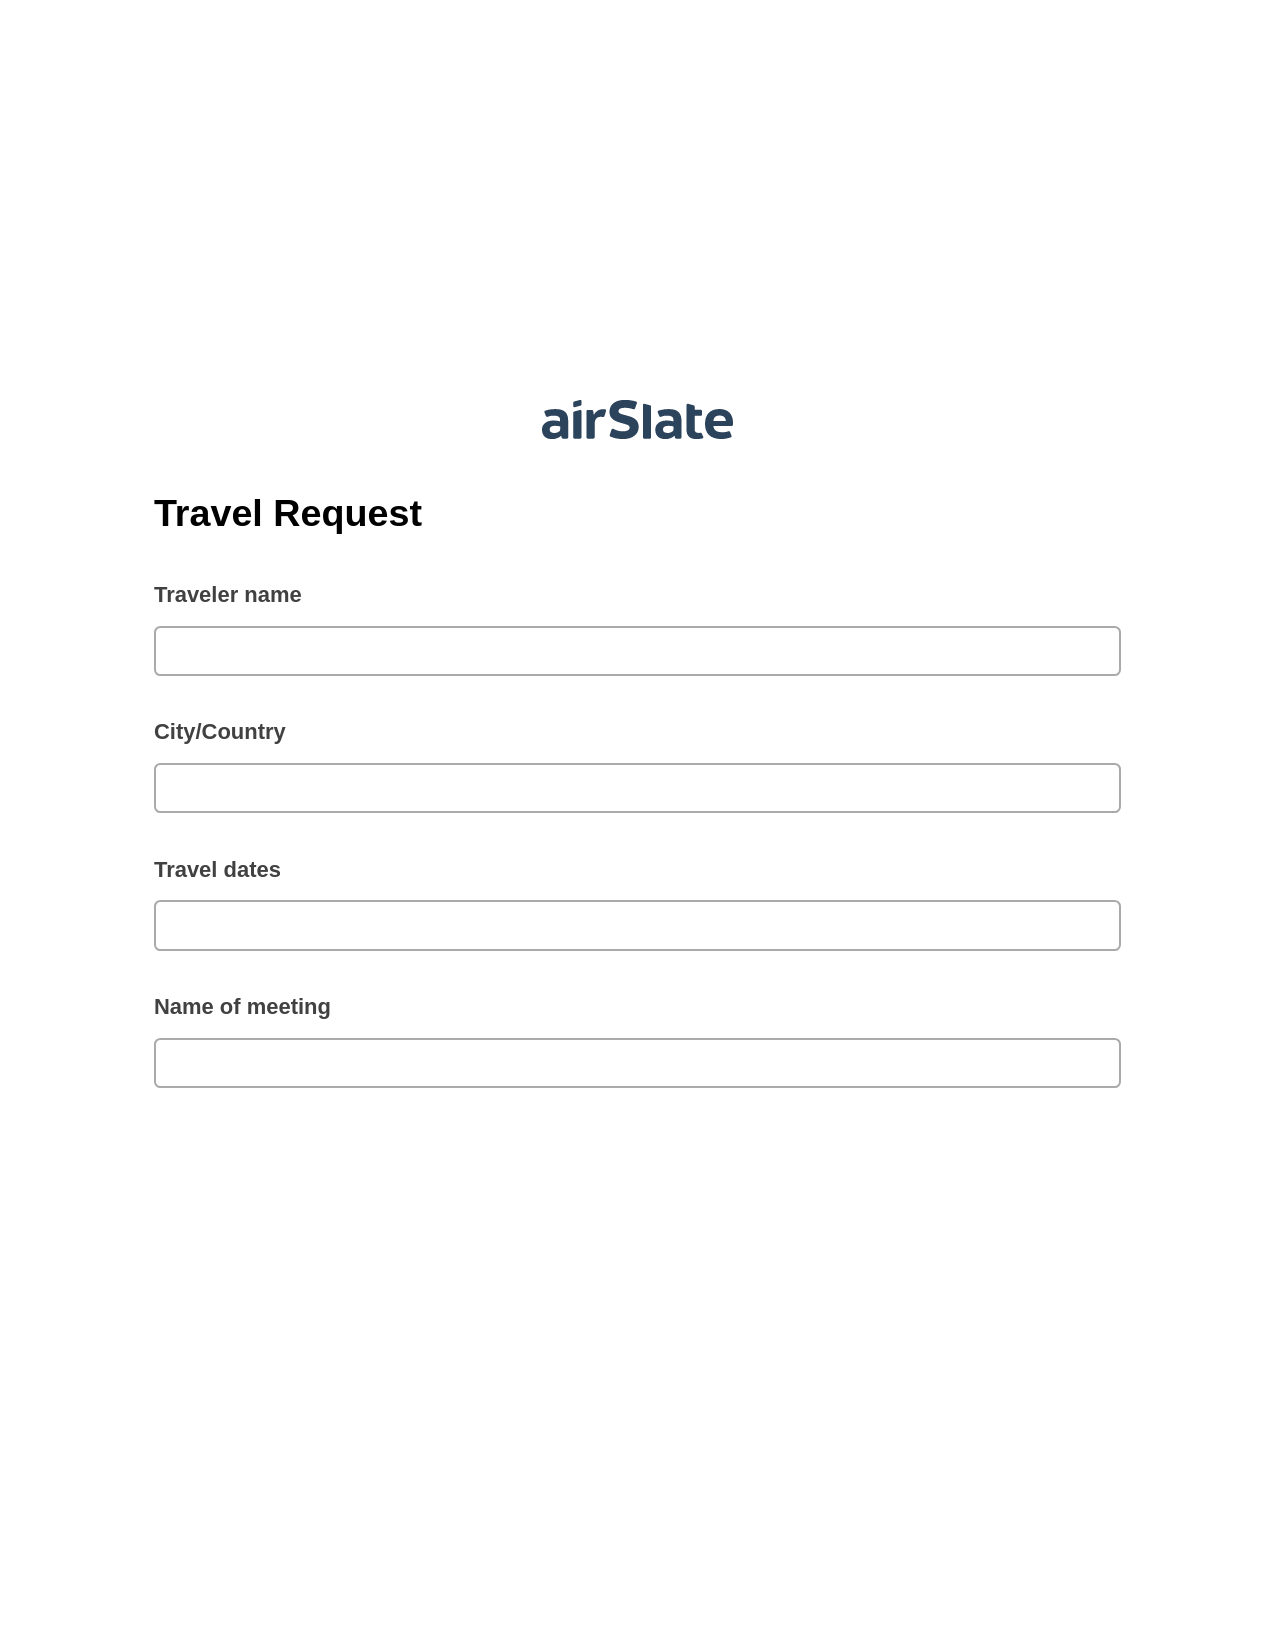 Travel Request Pre-fill from CSV File Bot, Create slate addon, Export to Formstack Documents Bot